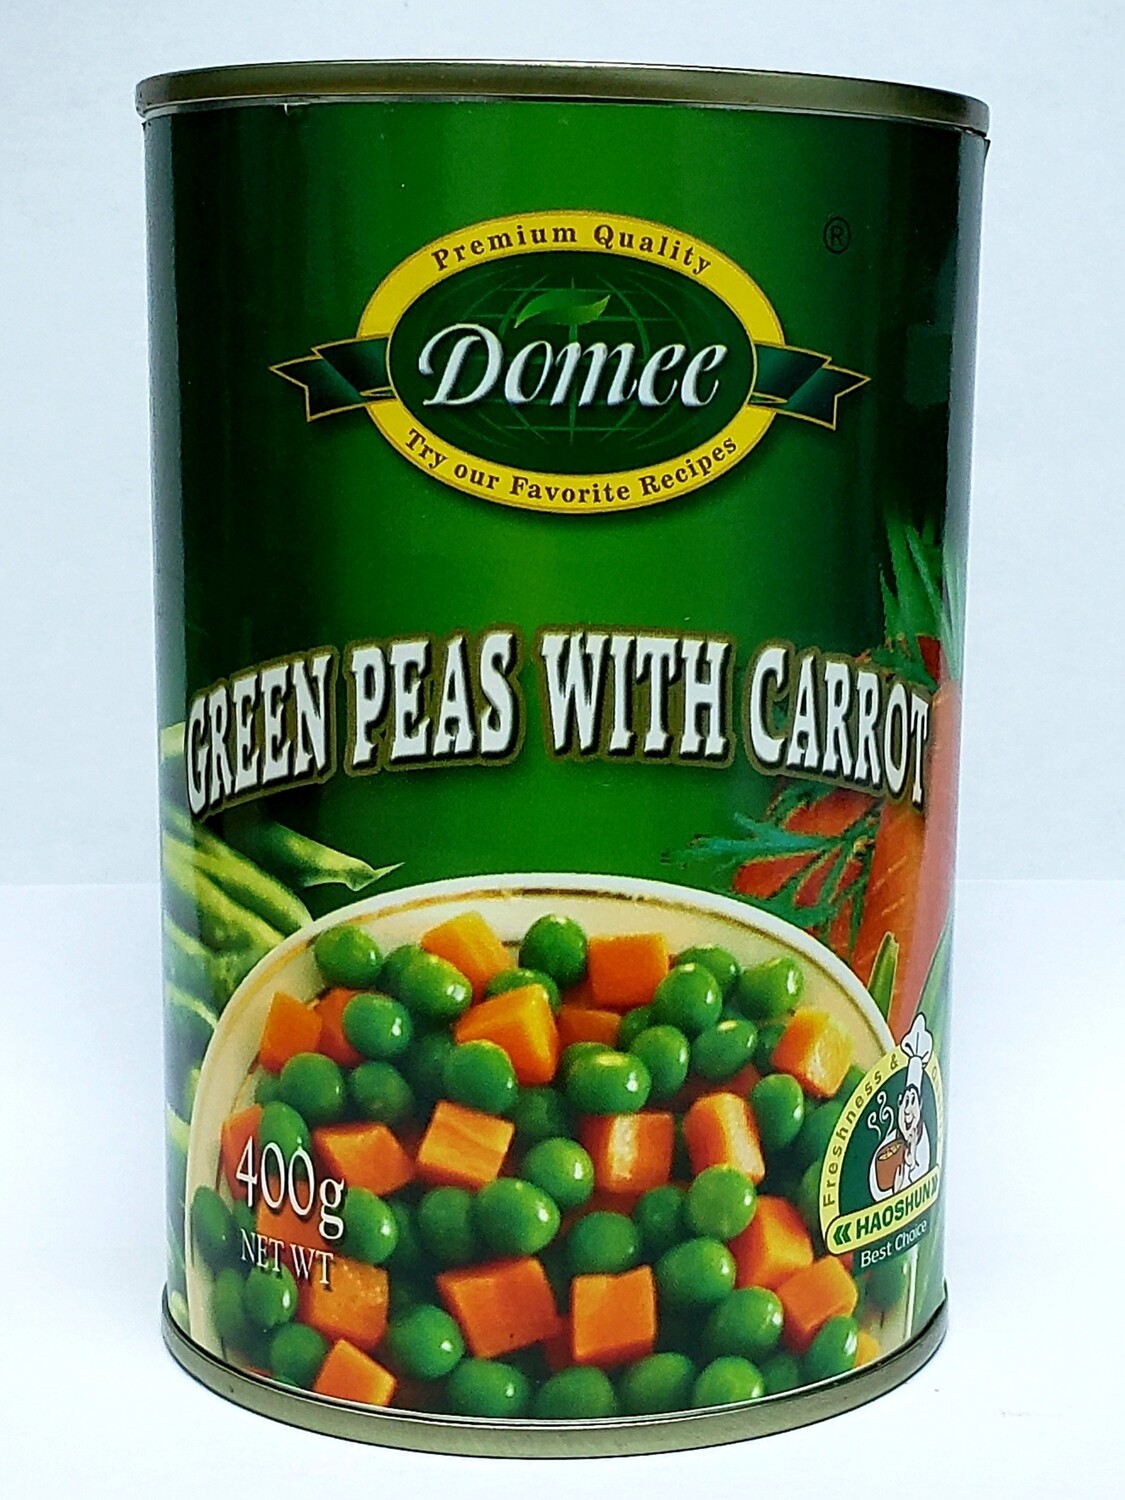 DOMEE PEAS AND CARROTS 400g